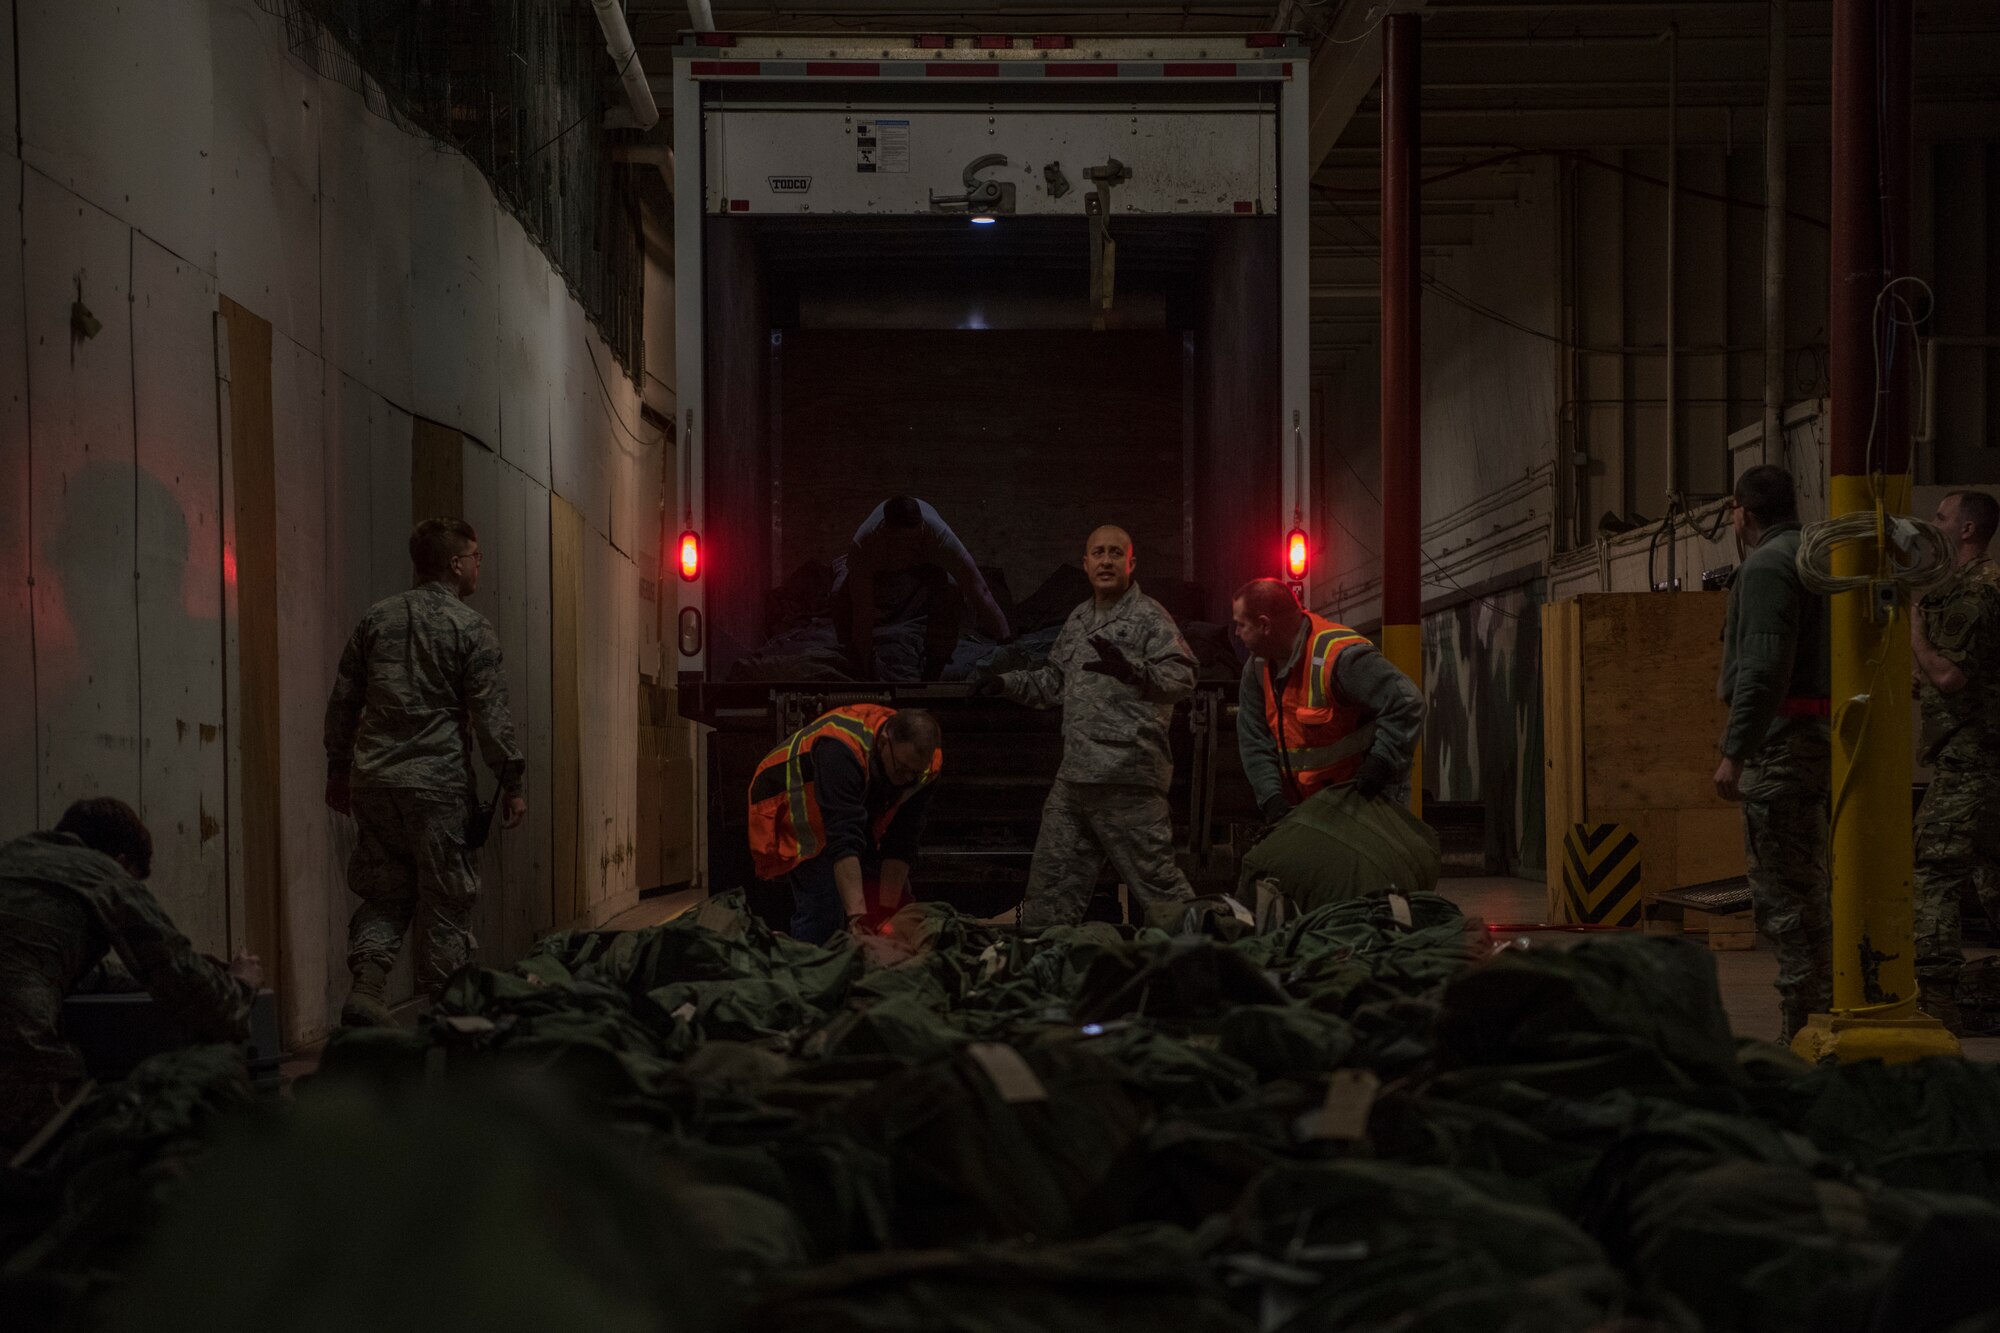 U.S. Air Force Senior Master Sgt. Nabbile Sanchez, 673d Logistics Readiness Squadron materiel management superintendent, gives direction for simulated deployment cargo loading during Polar Force 19-4 at Joint Base Elmendorf-Richardson, Alaska, March 25, 2019. Polar Force is a two-week exercise designed to test JBER’s mission readiness. Exercises like this strengthen and develop the skills service members require when facing adverse situations.